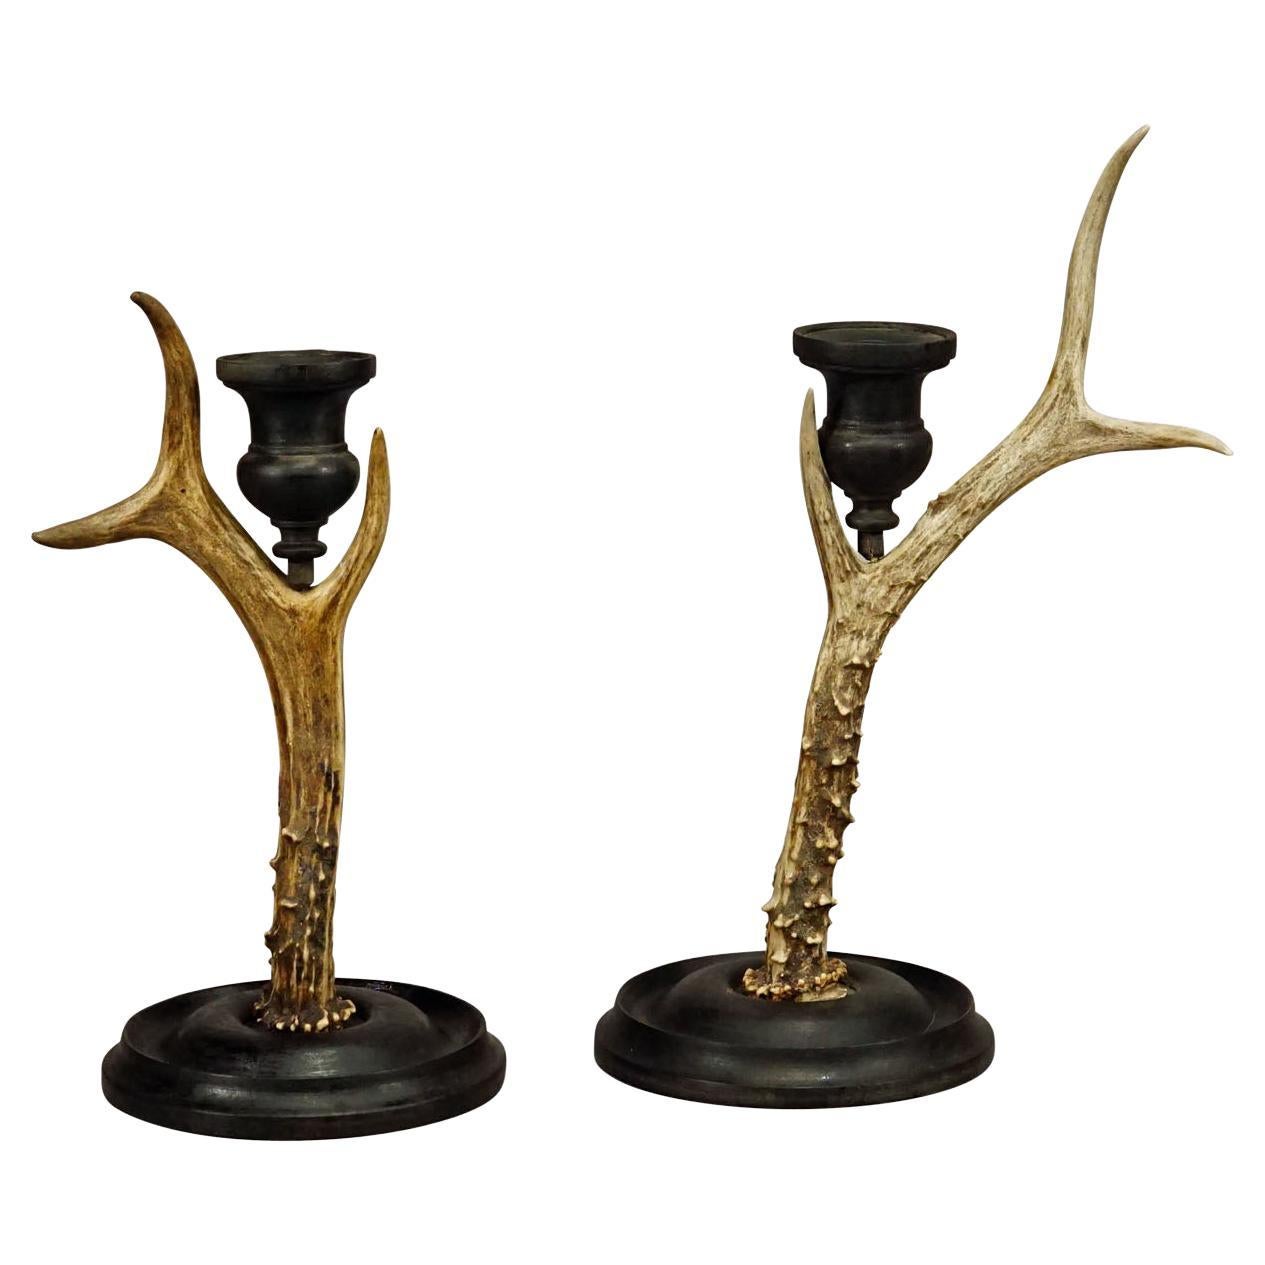 A Pair Vintage Black Forest Candle Holders with Wooden Base and Spout ca. 1930 For Sale